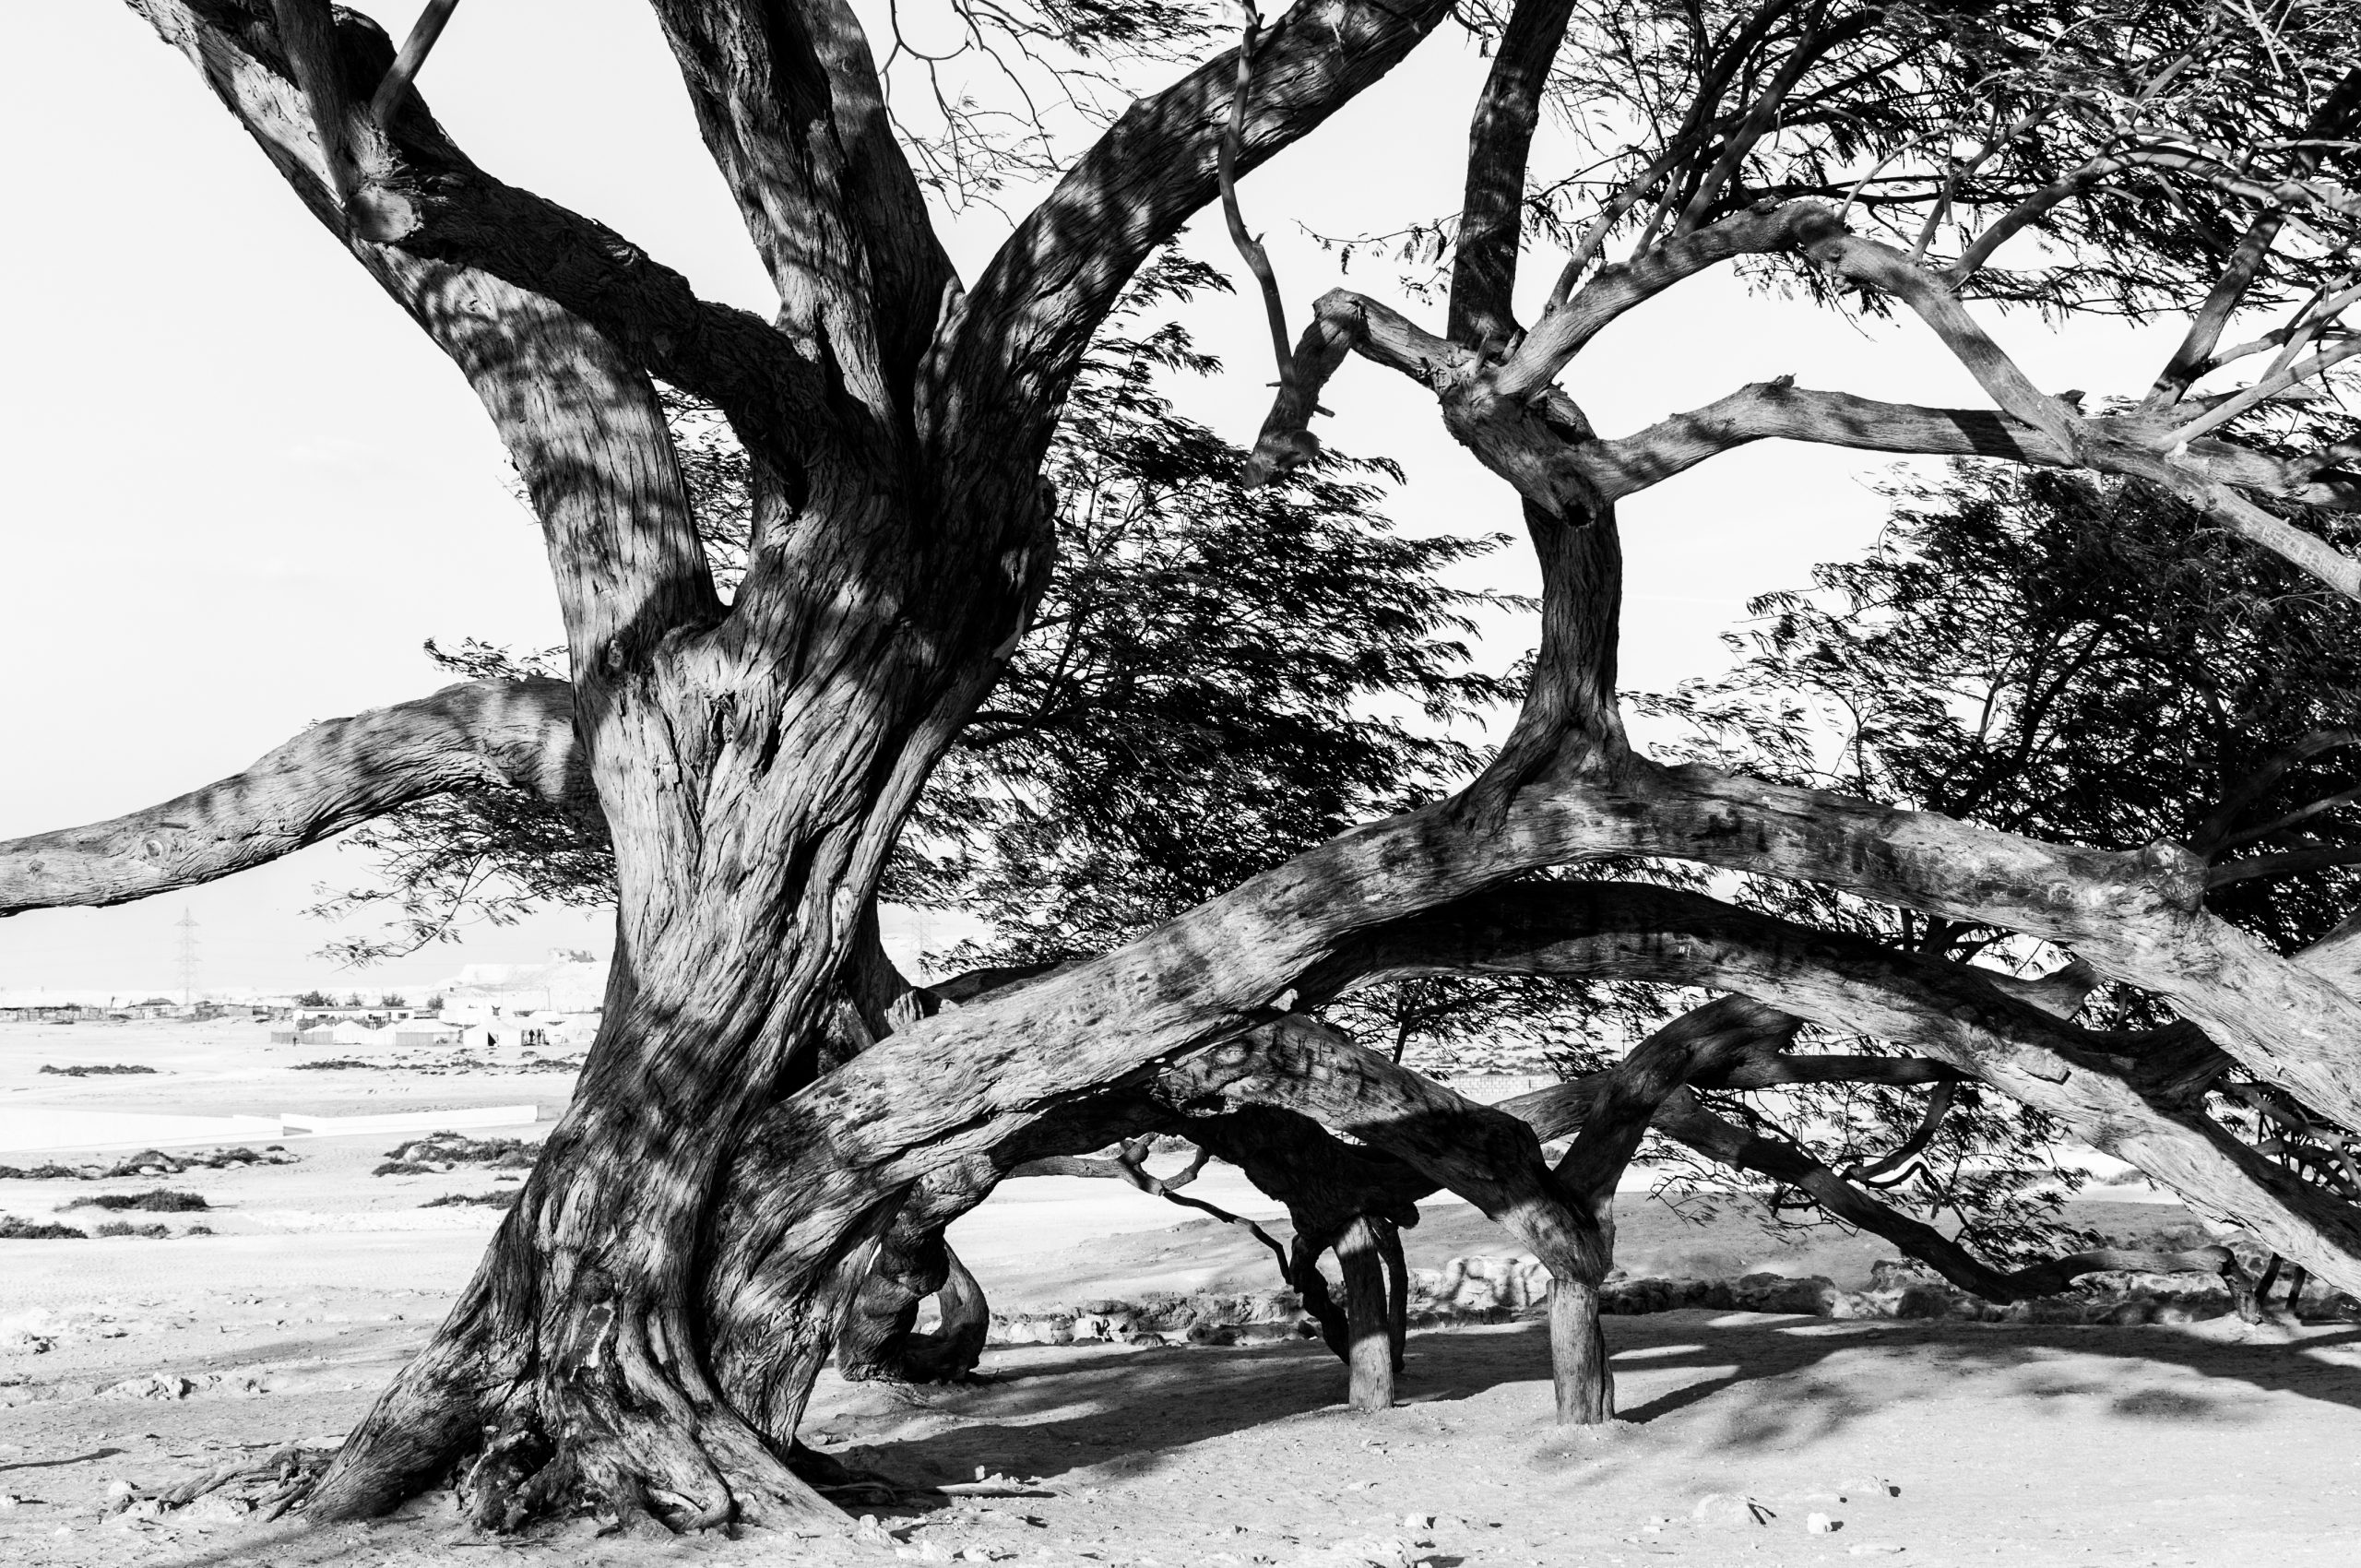 Black and white photograph of the close up of the trunk of Bahrain's famous Tree of Life